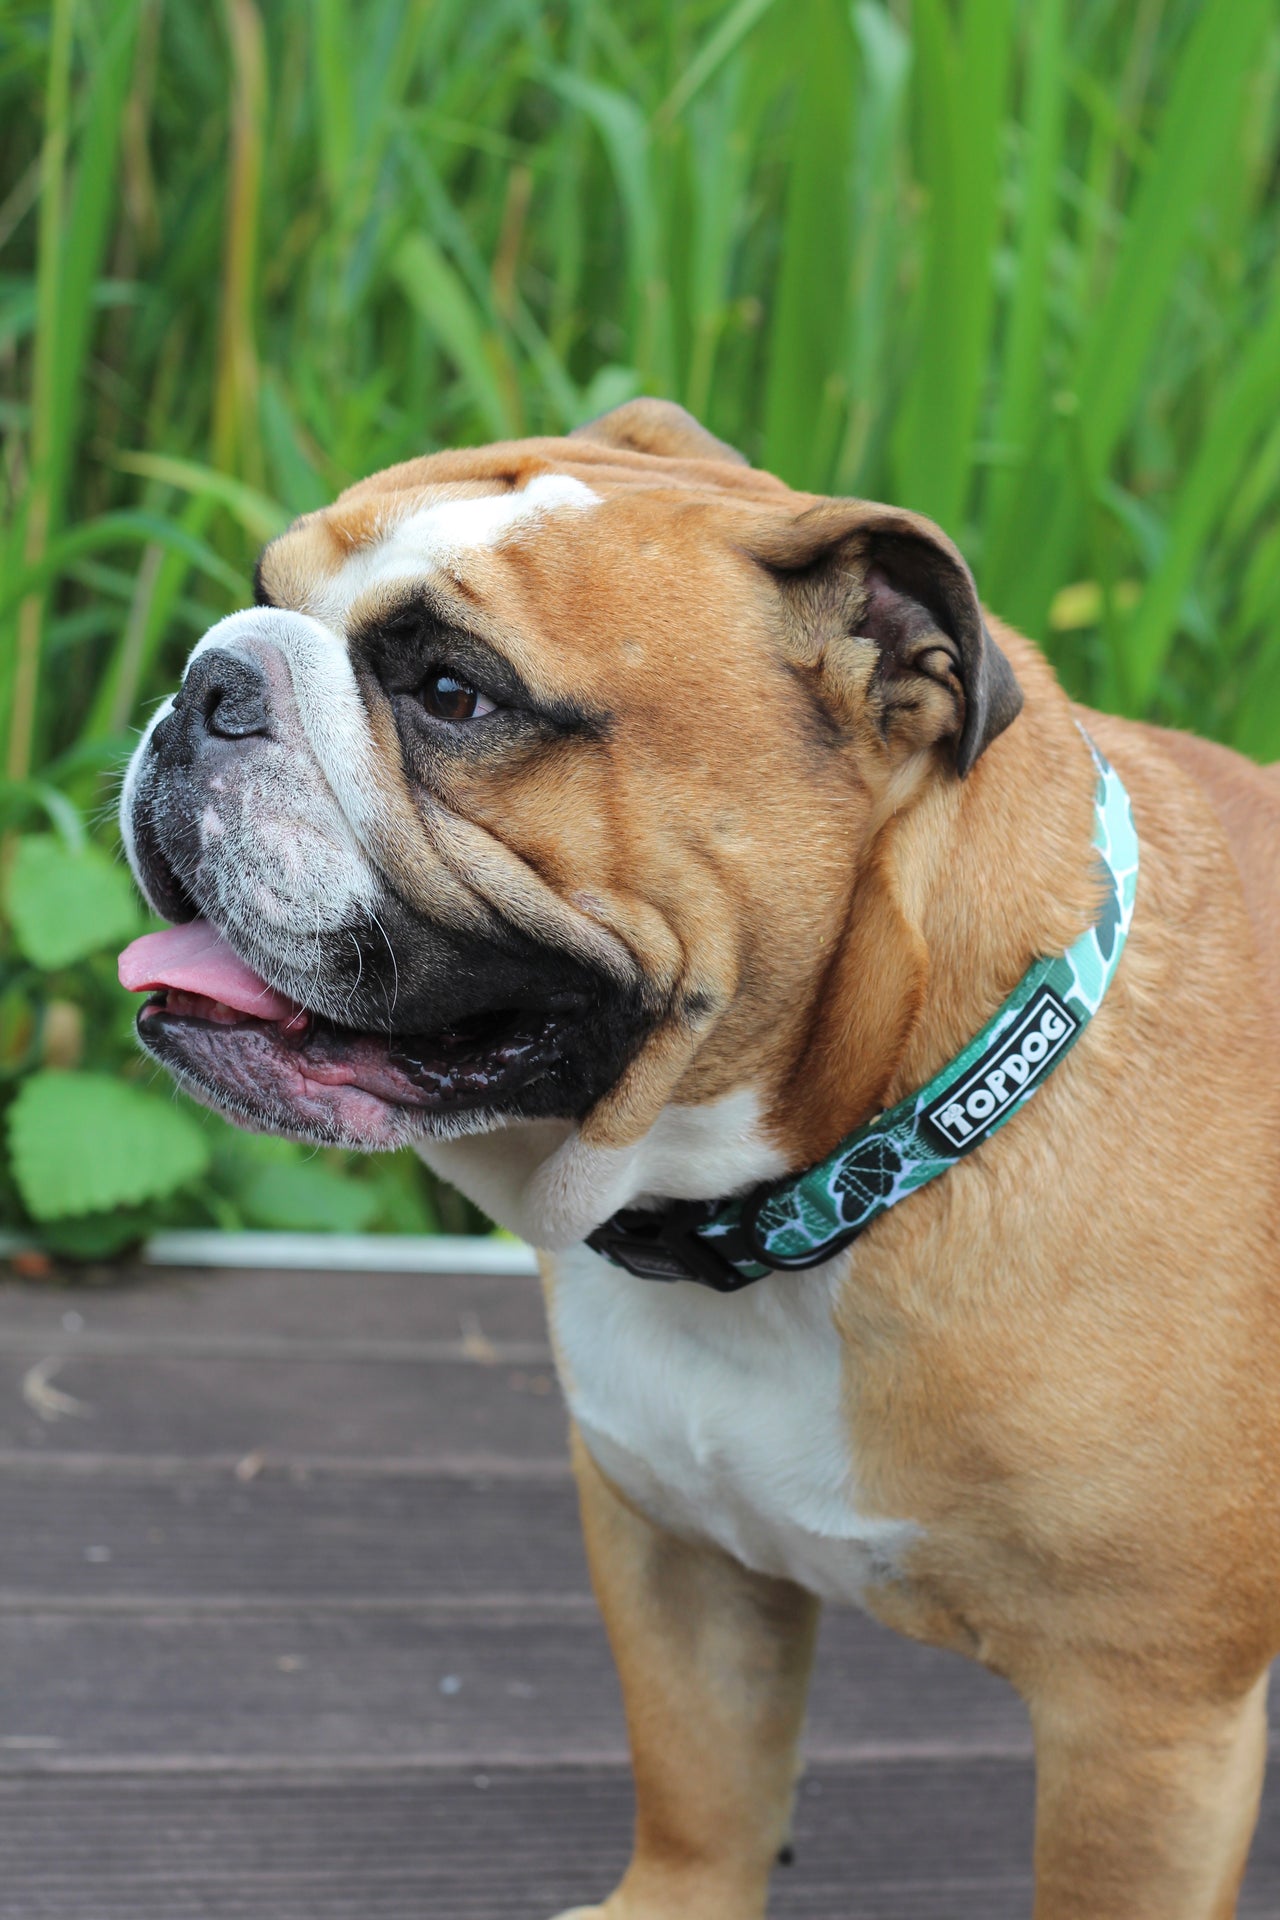 Bulldog wearing a TopDog Harnesses BeLeaf in Yourself Dog Collar standing on a decked area in front of some green plants